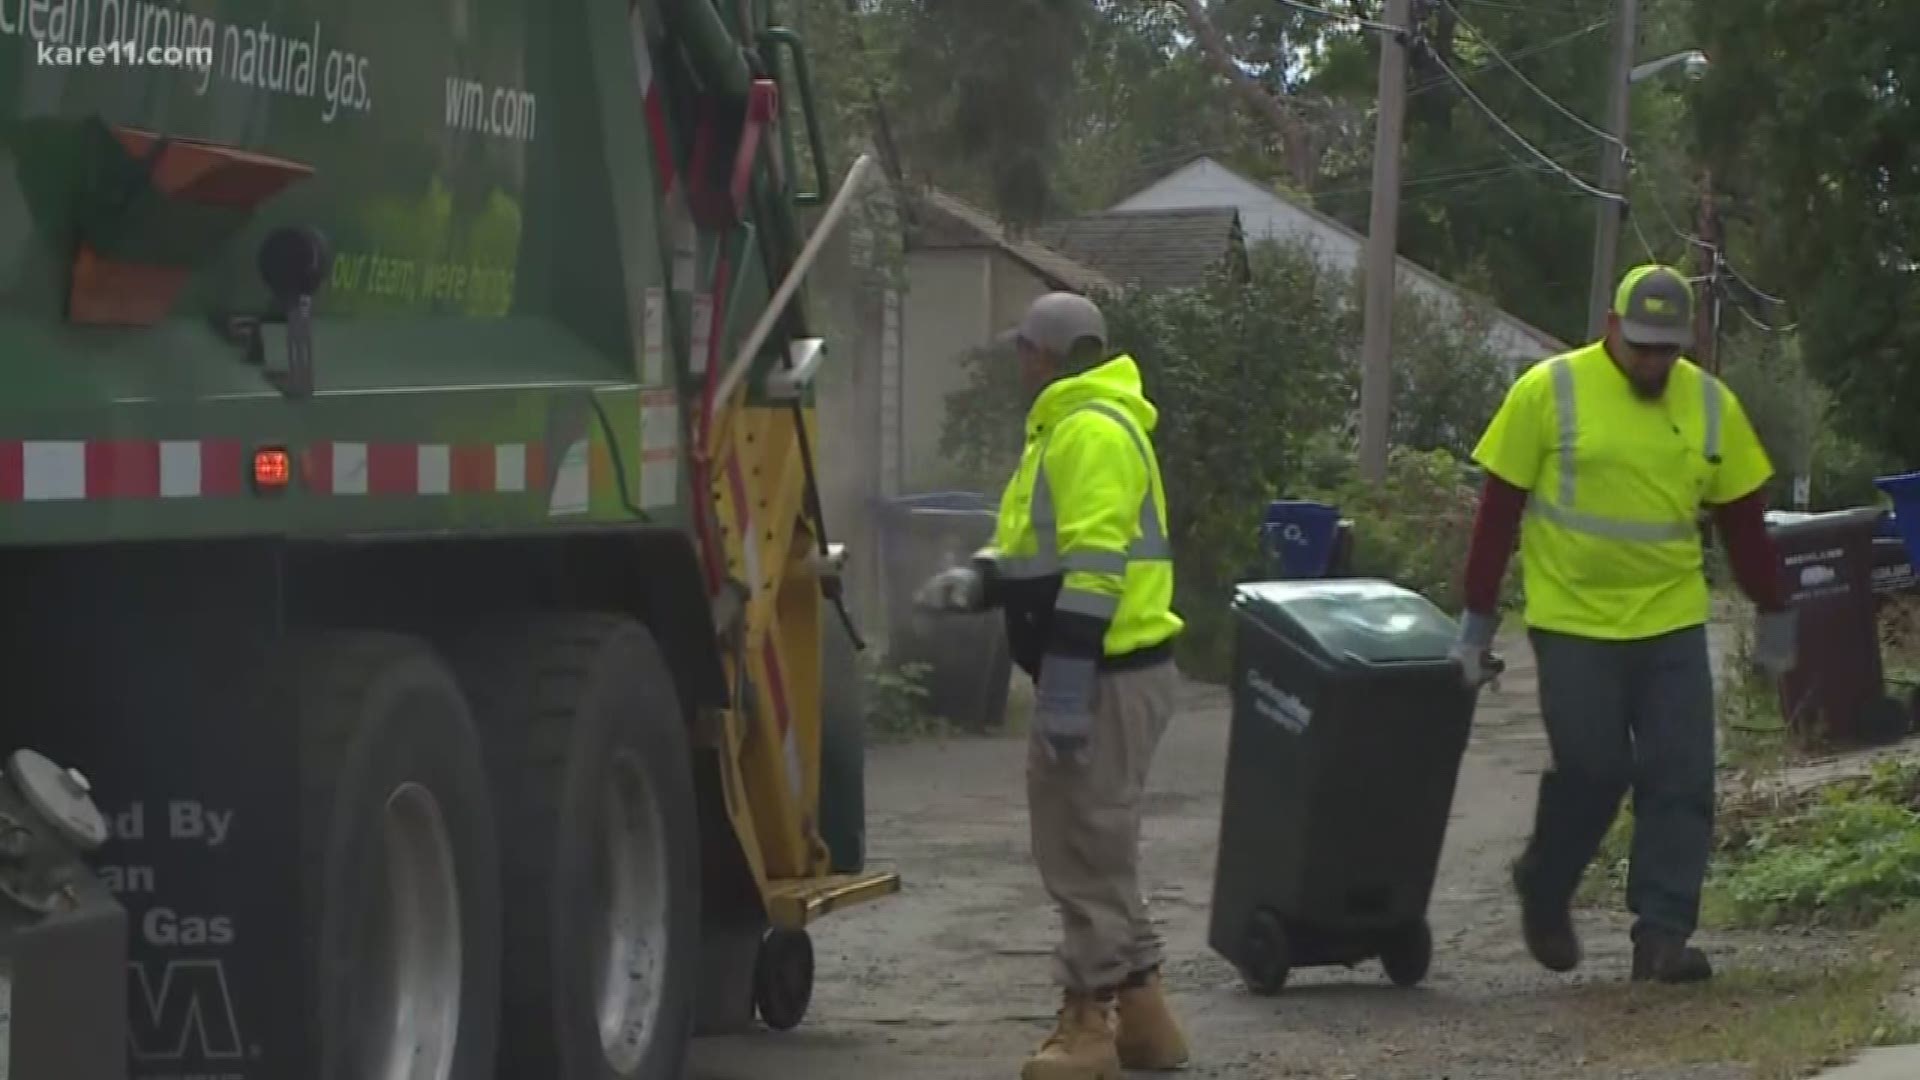 Opponents of St. Paul's new trash collection system won a battle by forcing a vote on whether to keep it. But even if voters decide to scuttle the garbage ordinance, the city will still be contractually bound to pay the current haulers $27 million next year, according to the Mayor. He warned that would result in a 17 percent property tax increase in the Capital City.